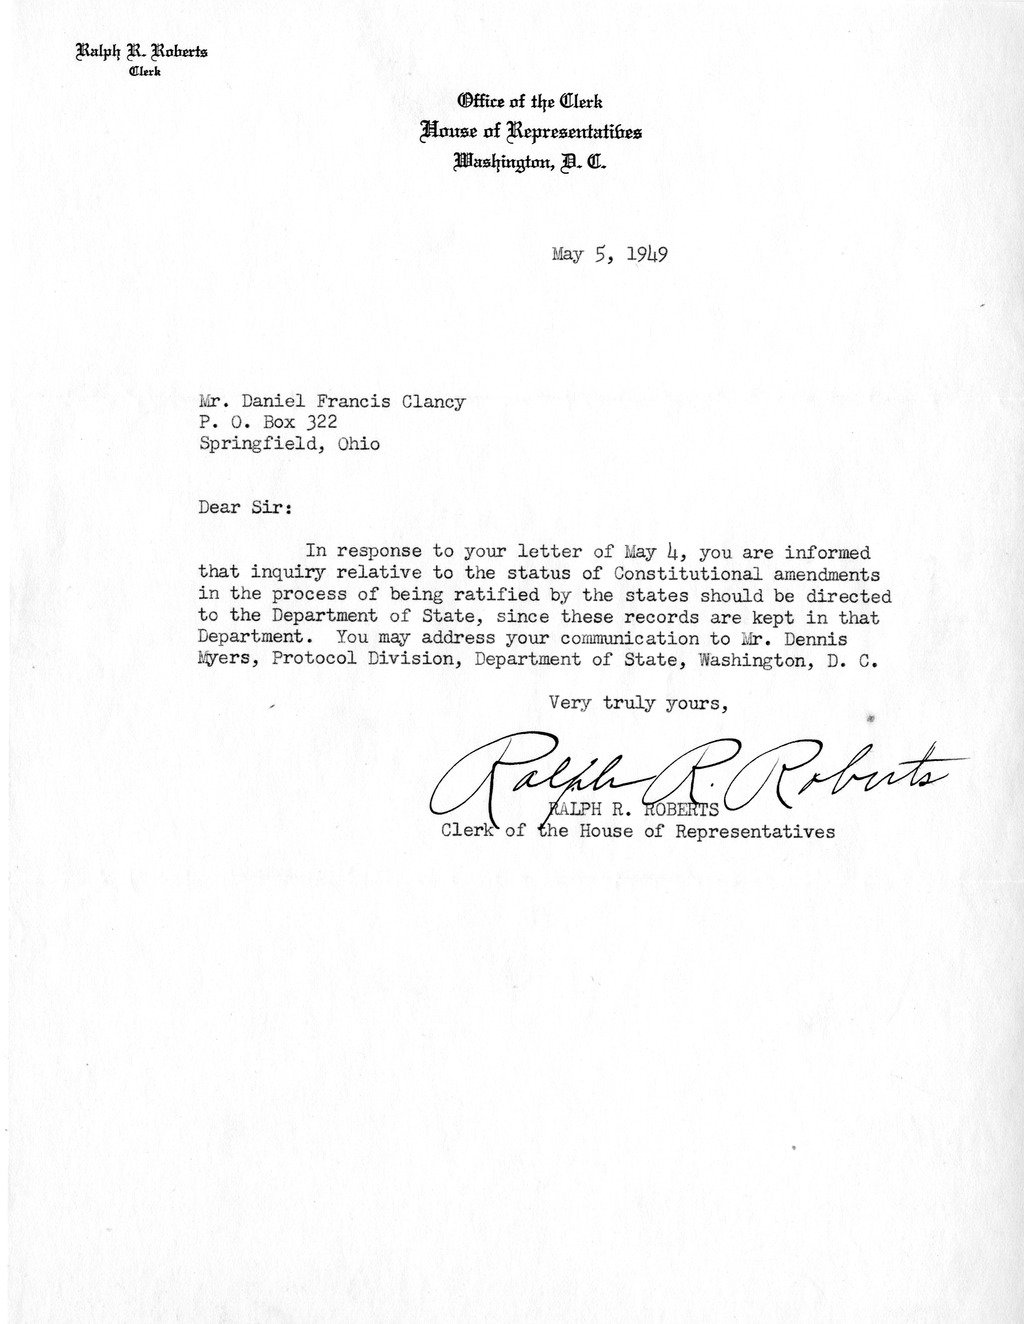 Letter from Ralph R. Roberts to Daniel F. Clancy